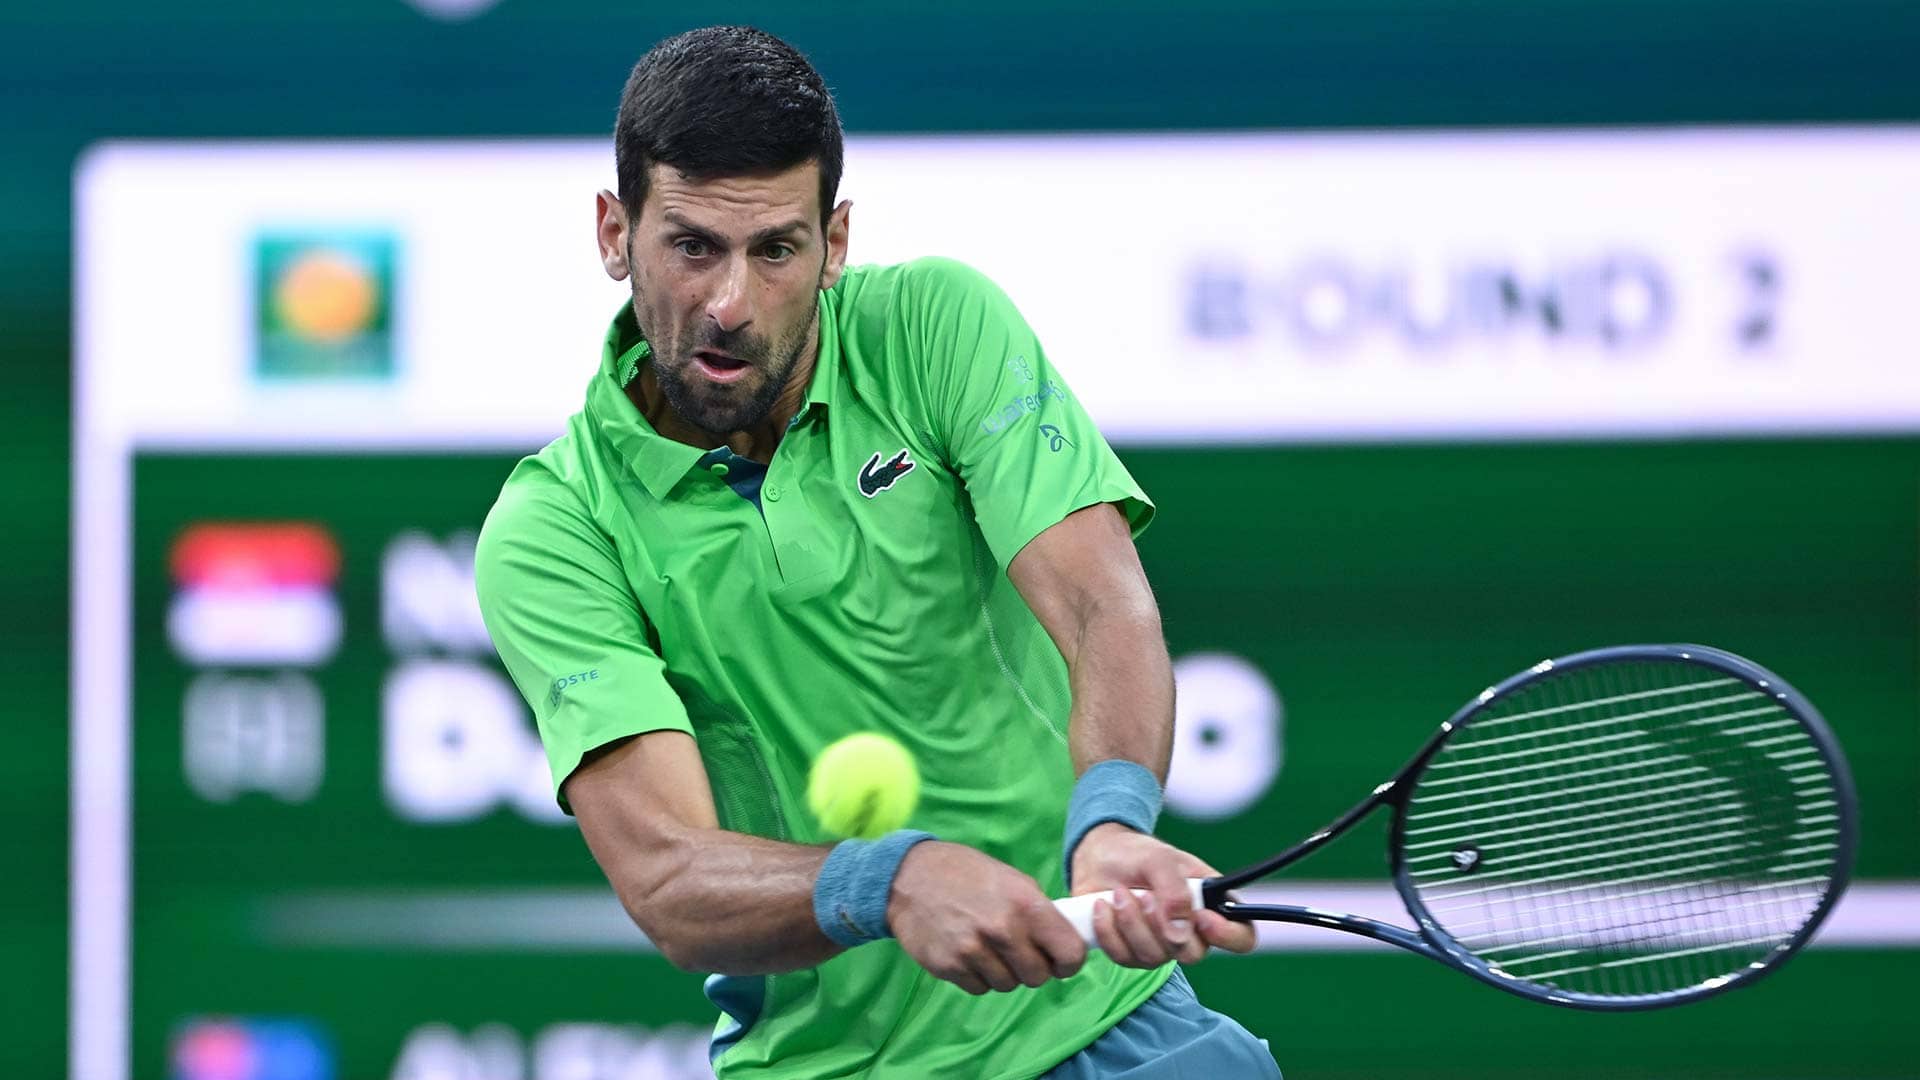 Novak Djokovic was competing for the first time since January.